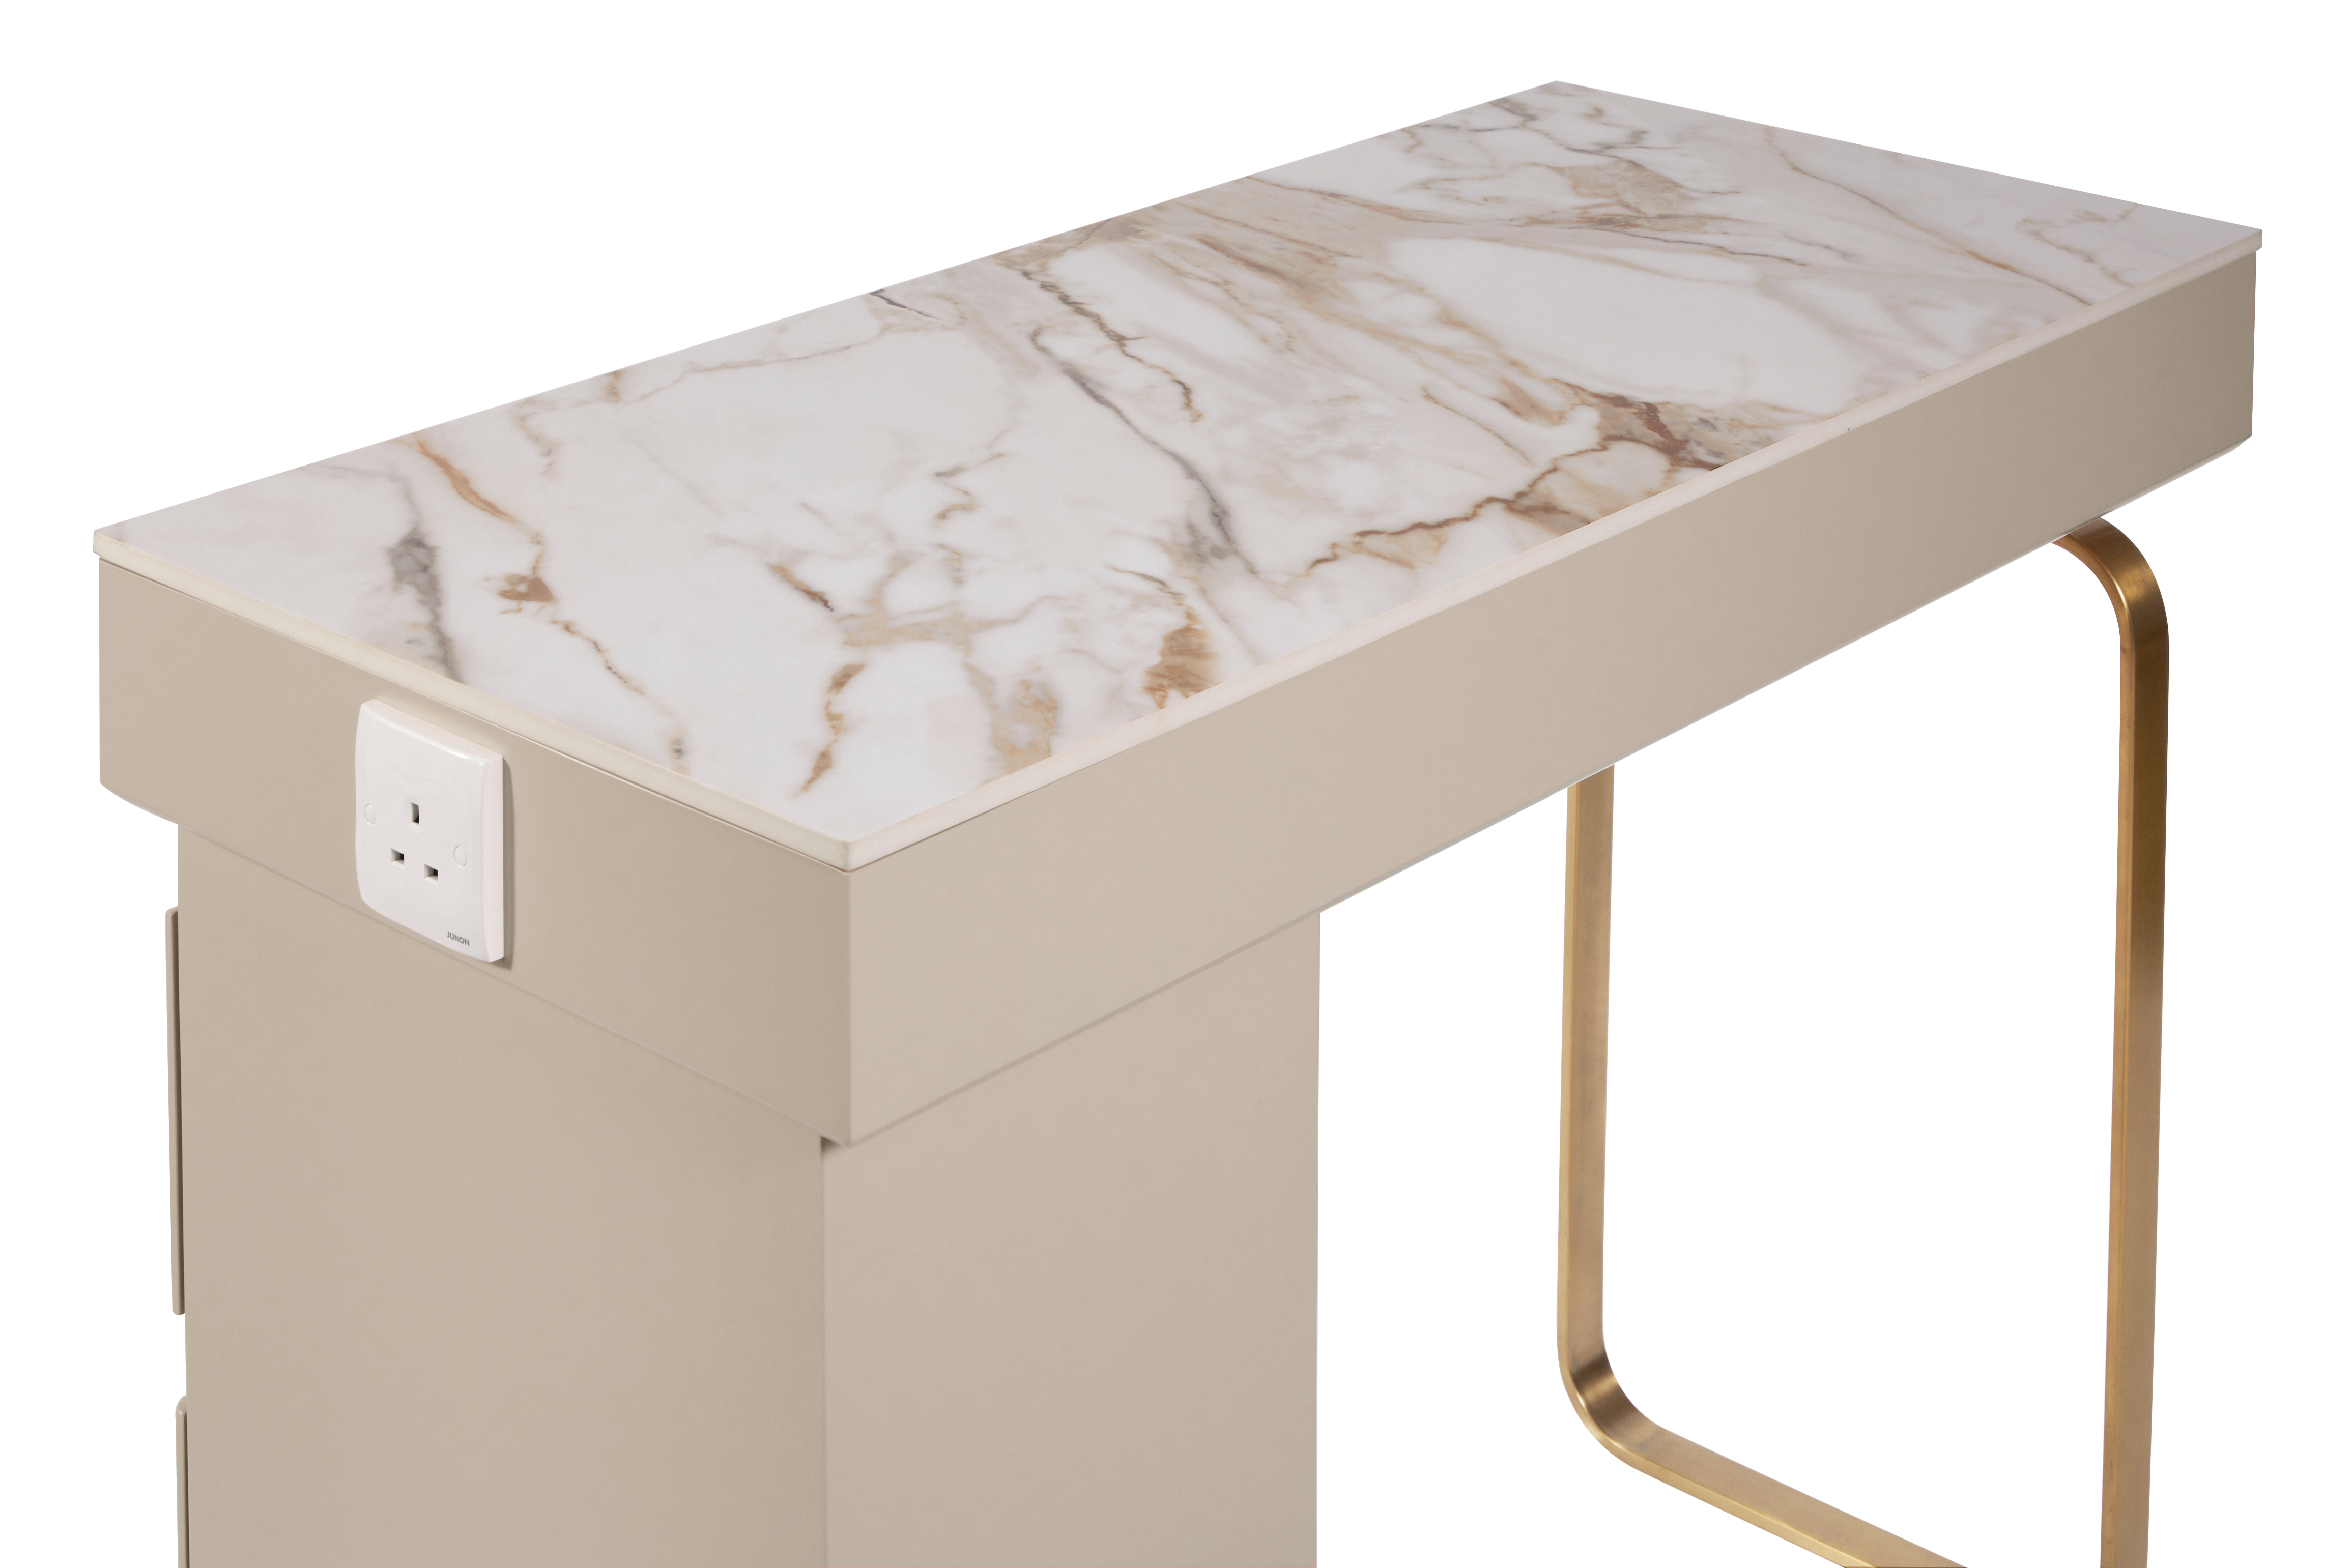 The Maia Nail Desk with White Gold Patterned Stone Top - Hessian & Gold by SEC